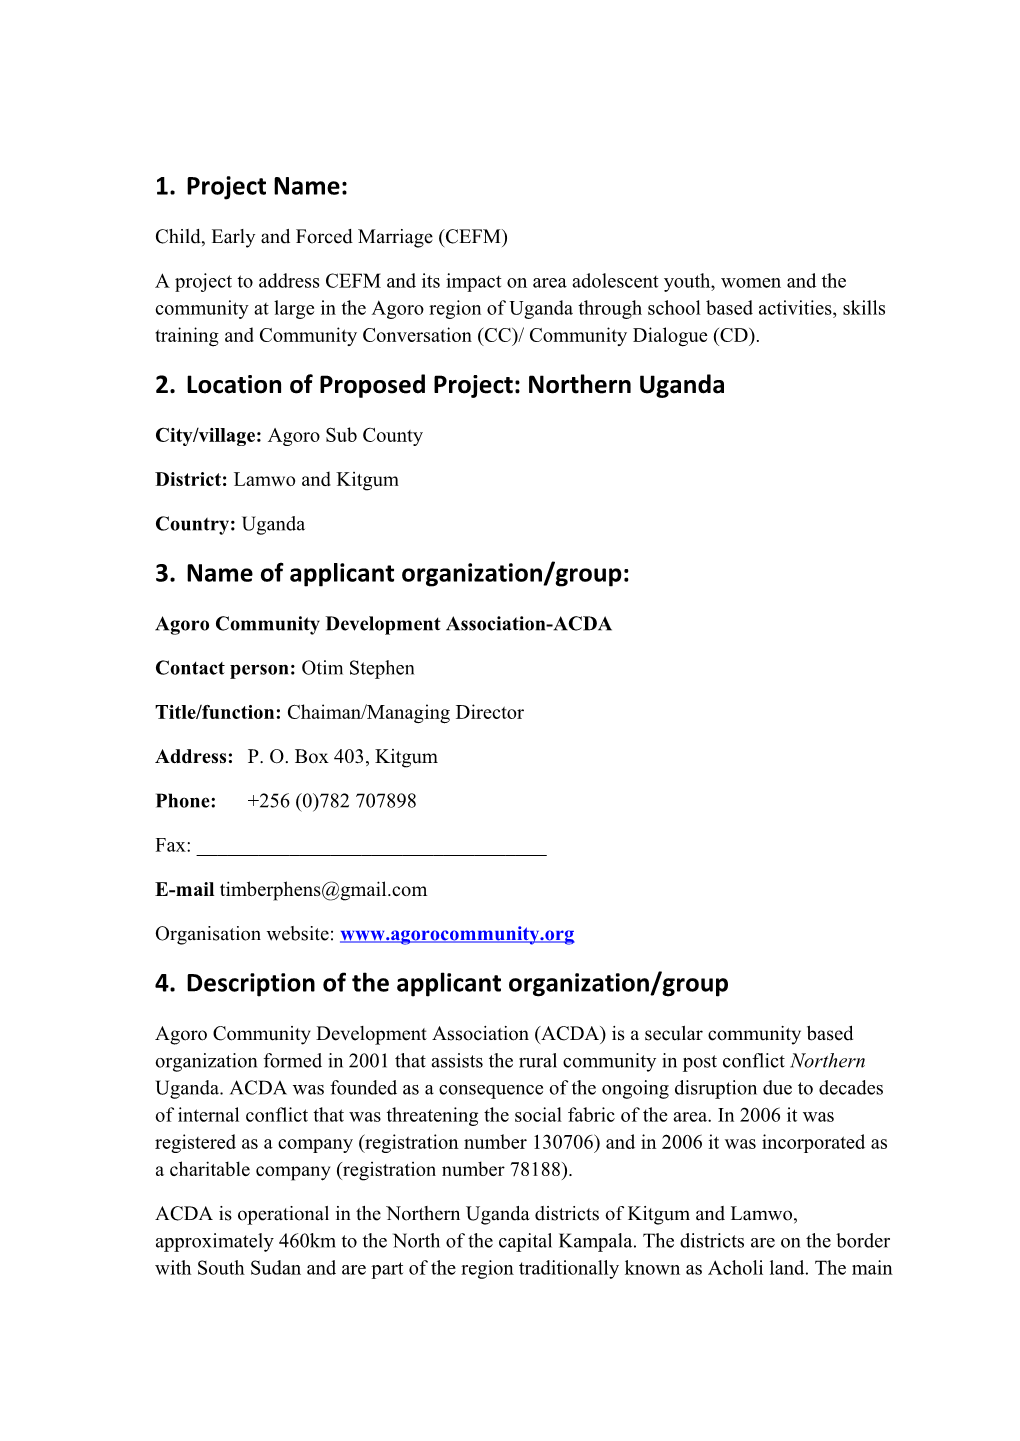 Project Application for Funding by the Canada Fund for Local Initiatives (CFLI)